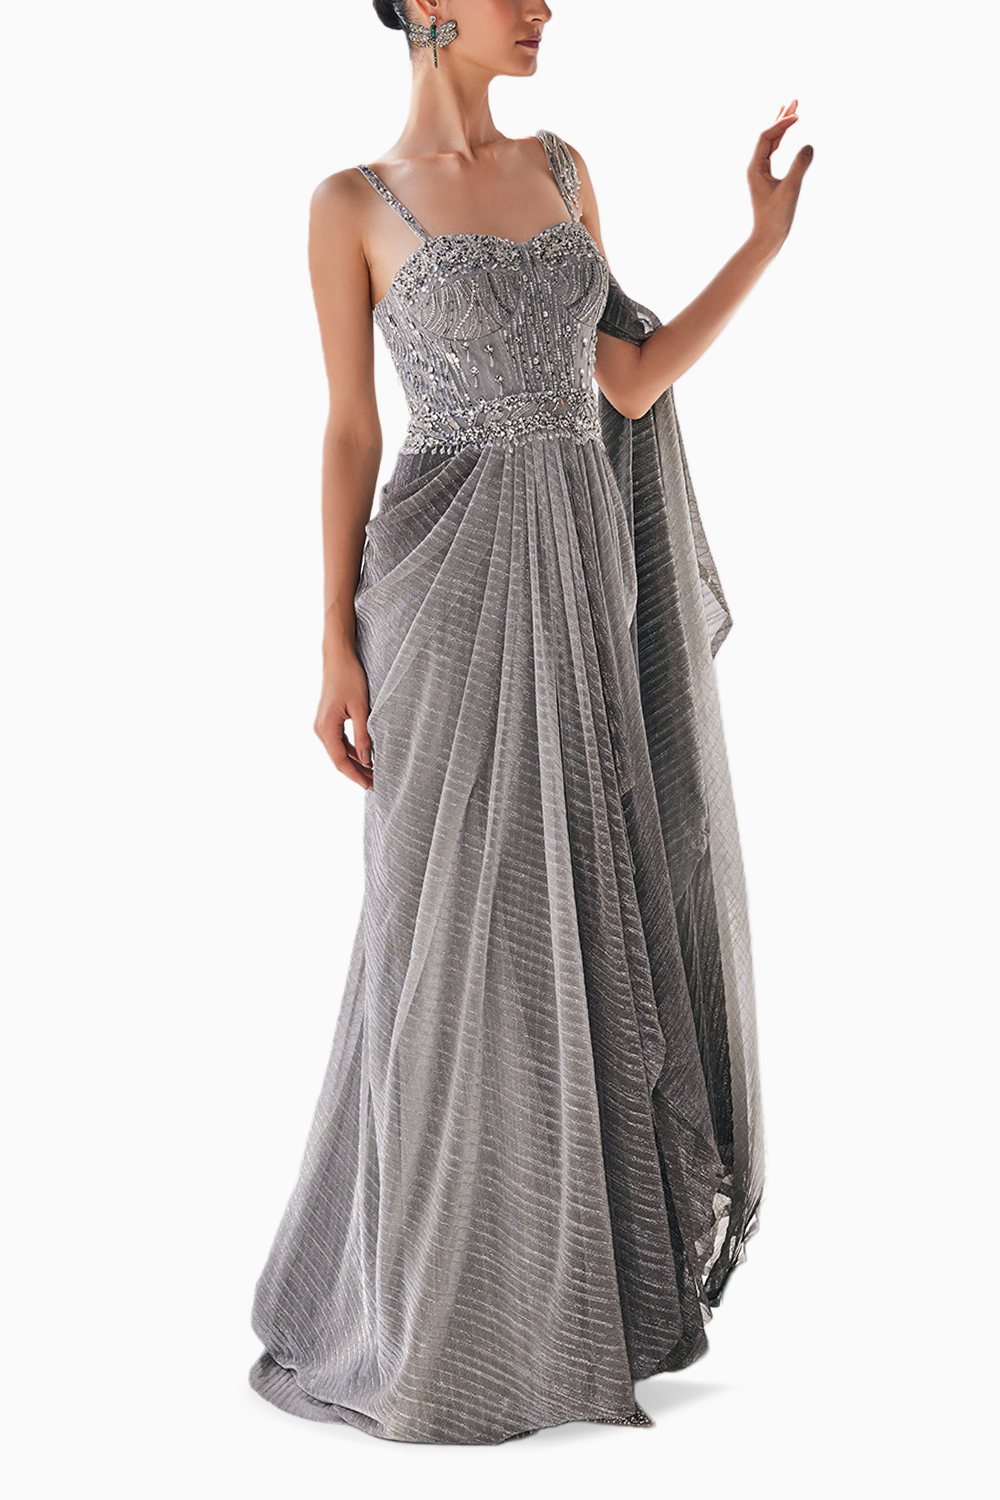 Twilight Shimmer Ombre Saree Gown